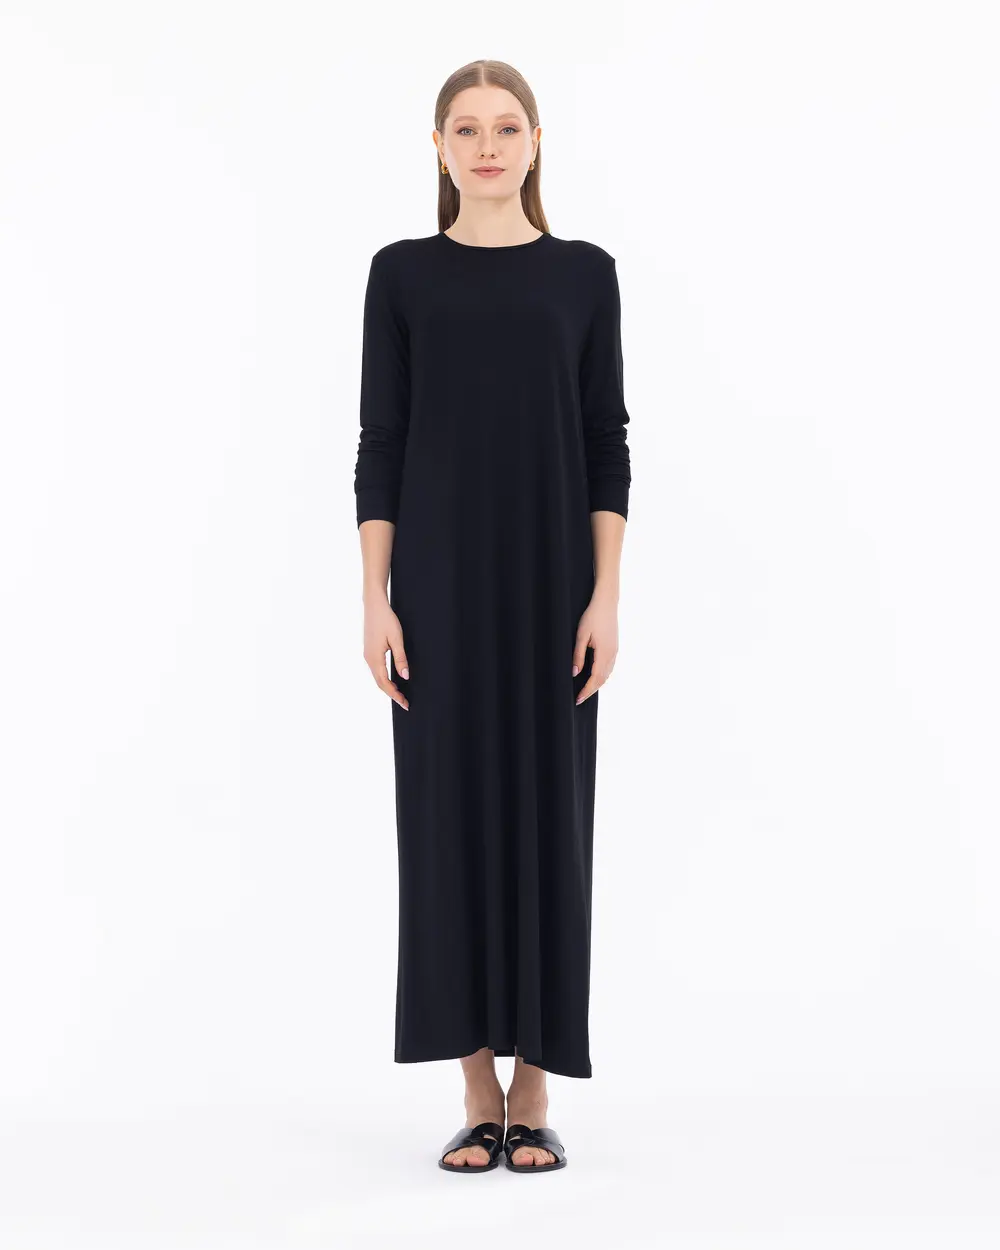 Relaxed Fit Round Neck Full Length Dress